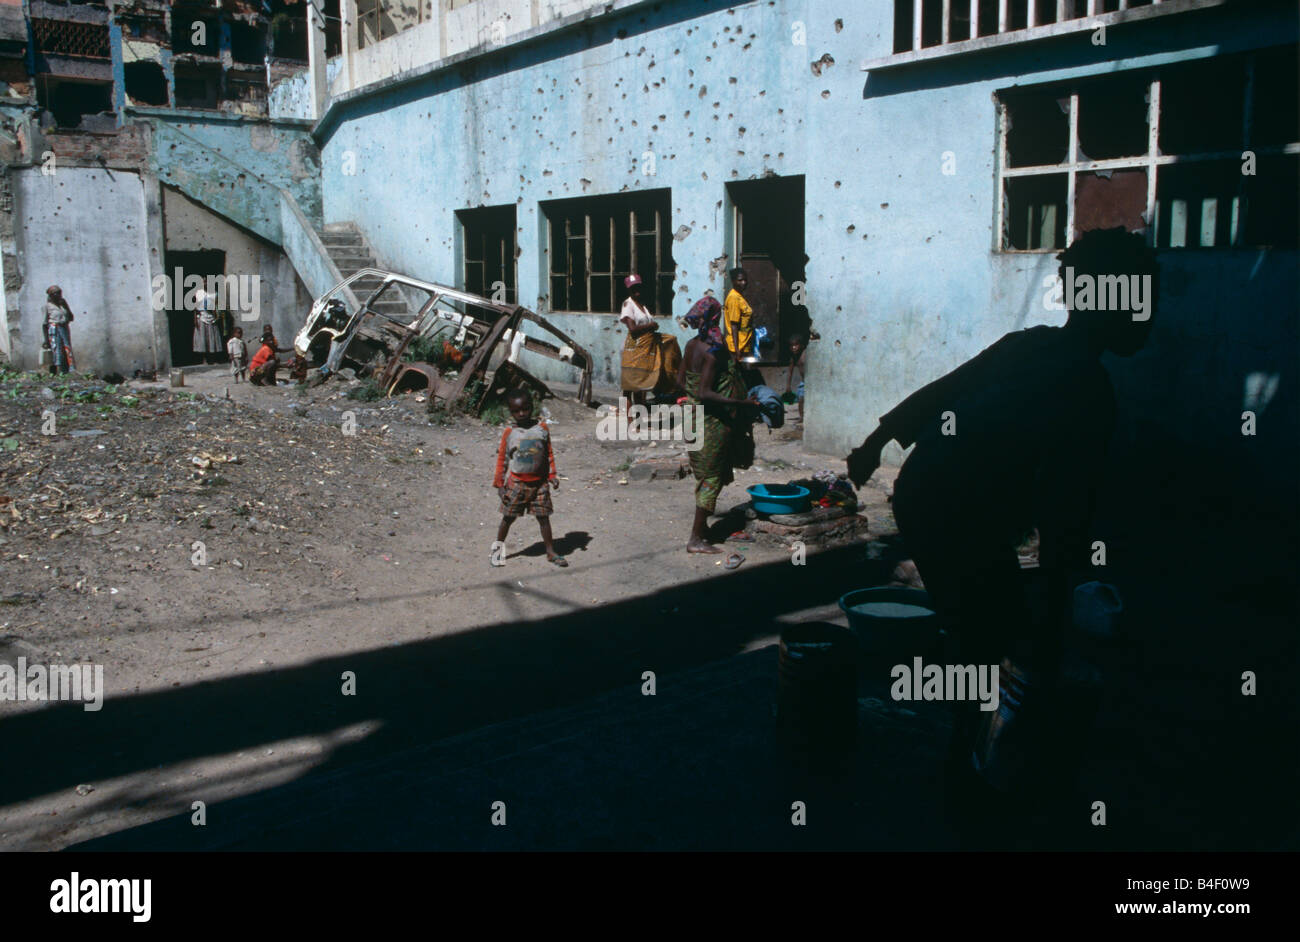 Displaced people sheltering in damaged building in war-ravaged Angola Stock Photo